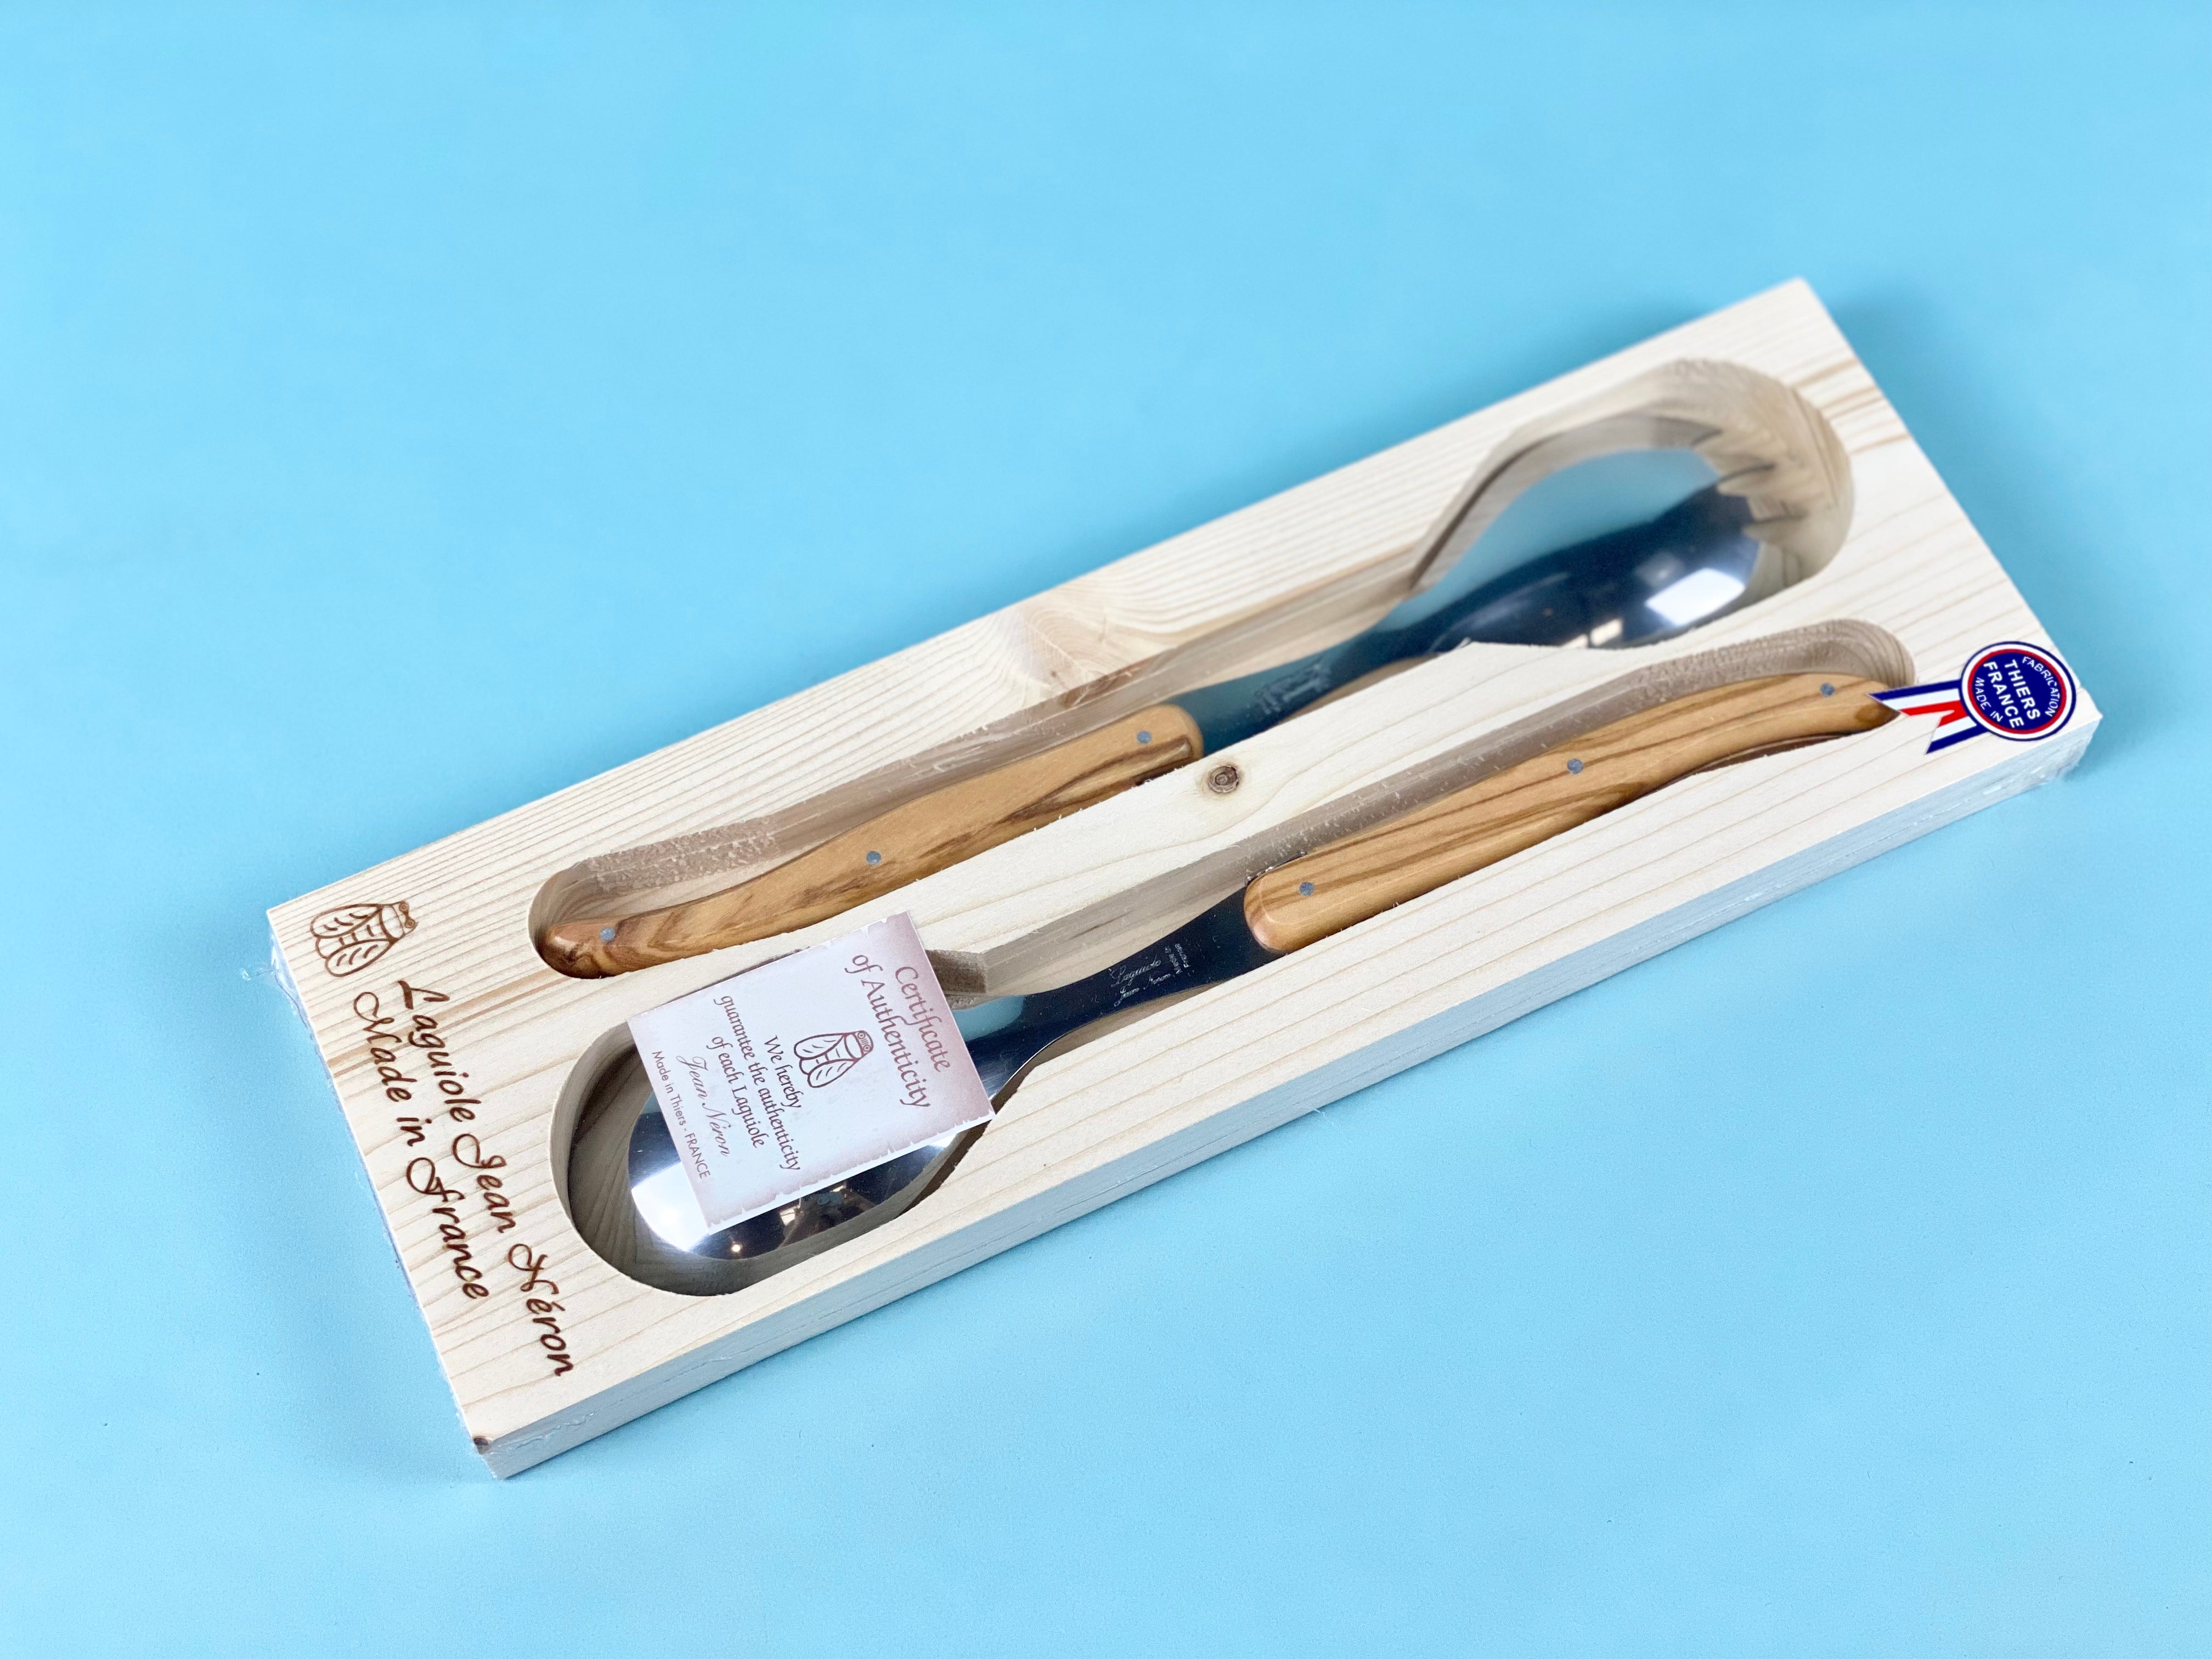 Laguiole French Olivewood Serving Set in Wood Box - Regular Finish Cutlery Laguiole Brand_Laguiole Carving Sets Kitchen_Dinnerware Laguiole Serveware PhotoJul27_101649AM